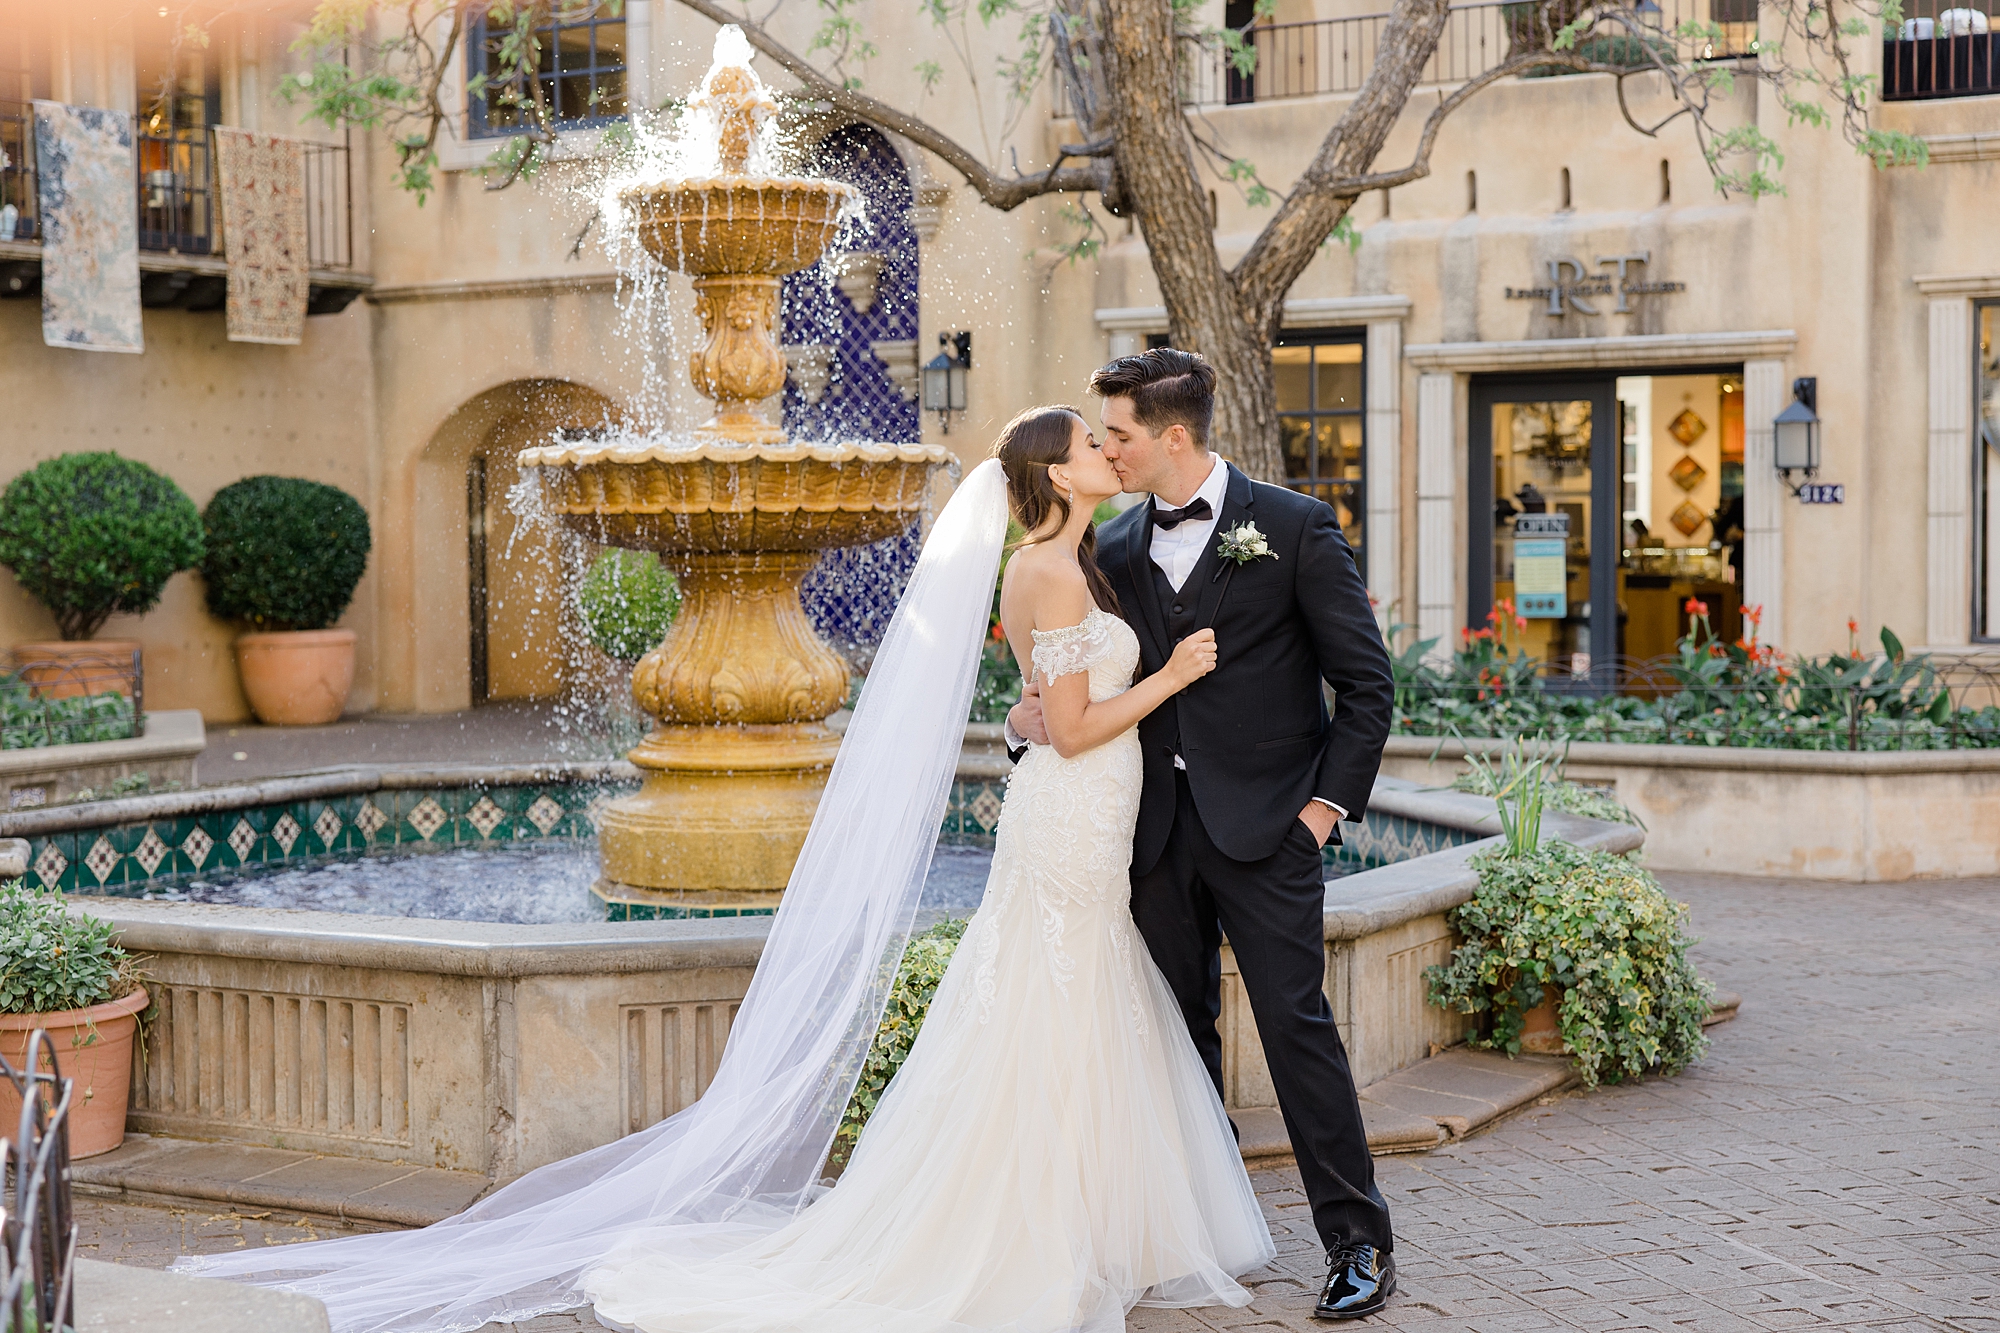 newlyweds kiss by fountain in courtyard at Tlaquepaque